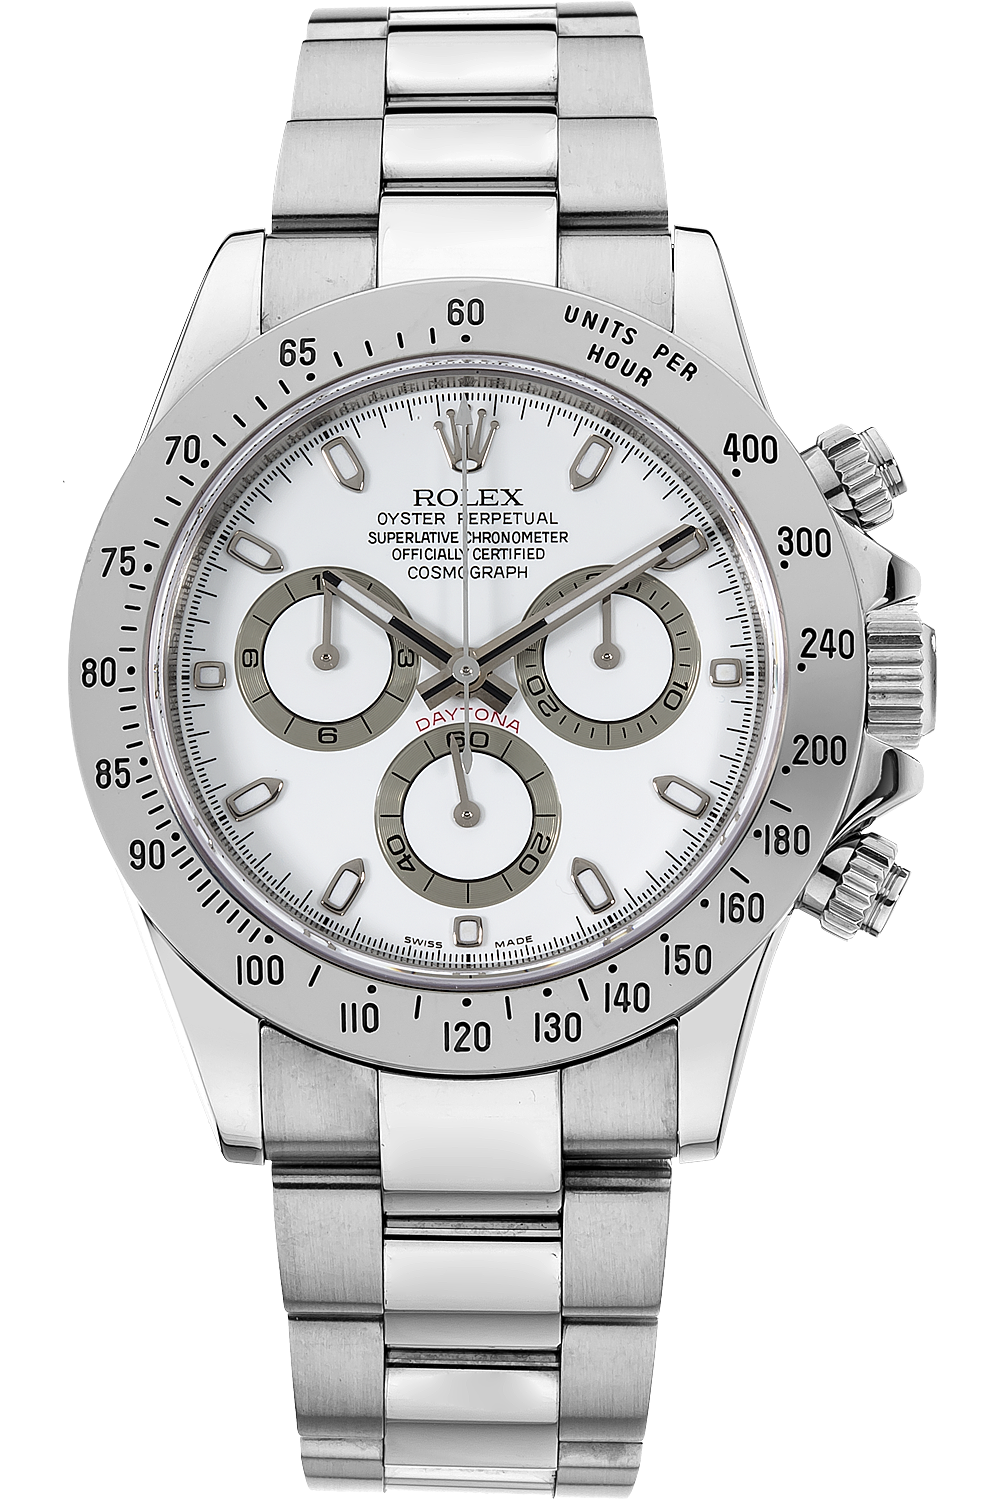 Pre-Owned Rolex Daytona Automatic (116520)